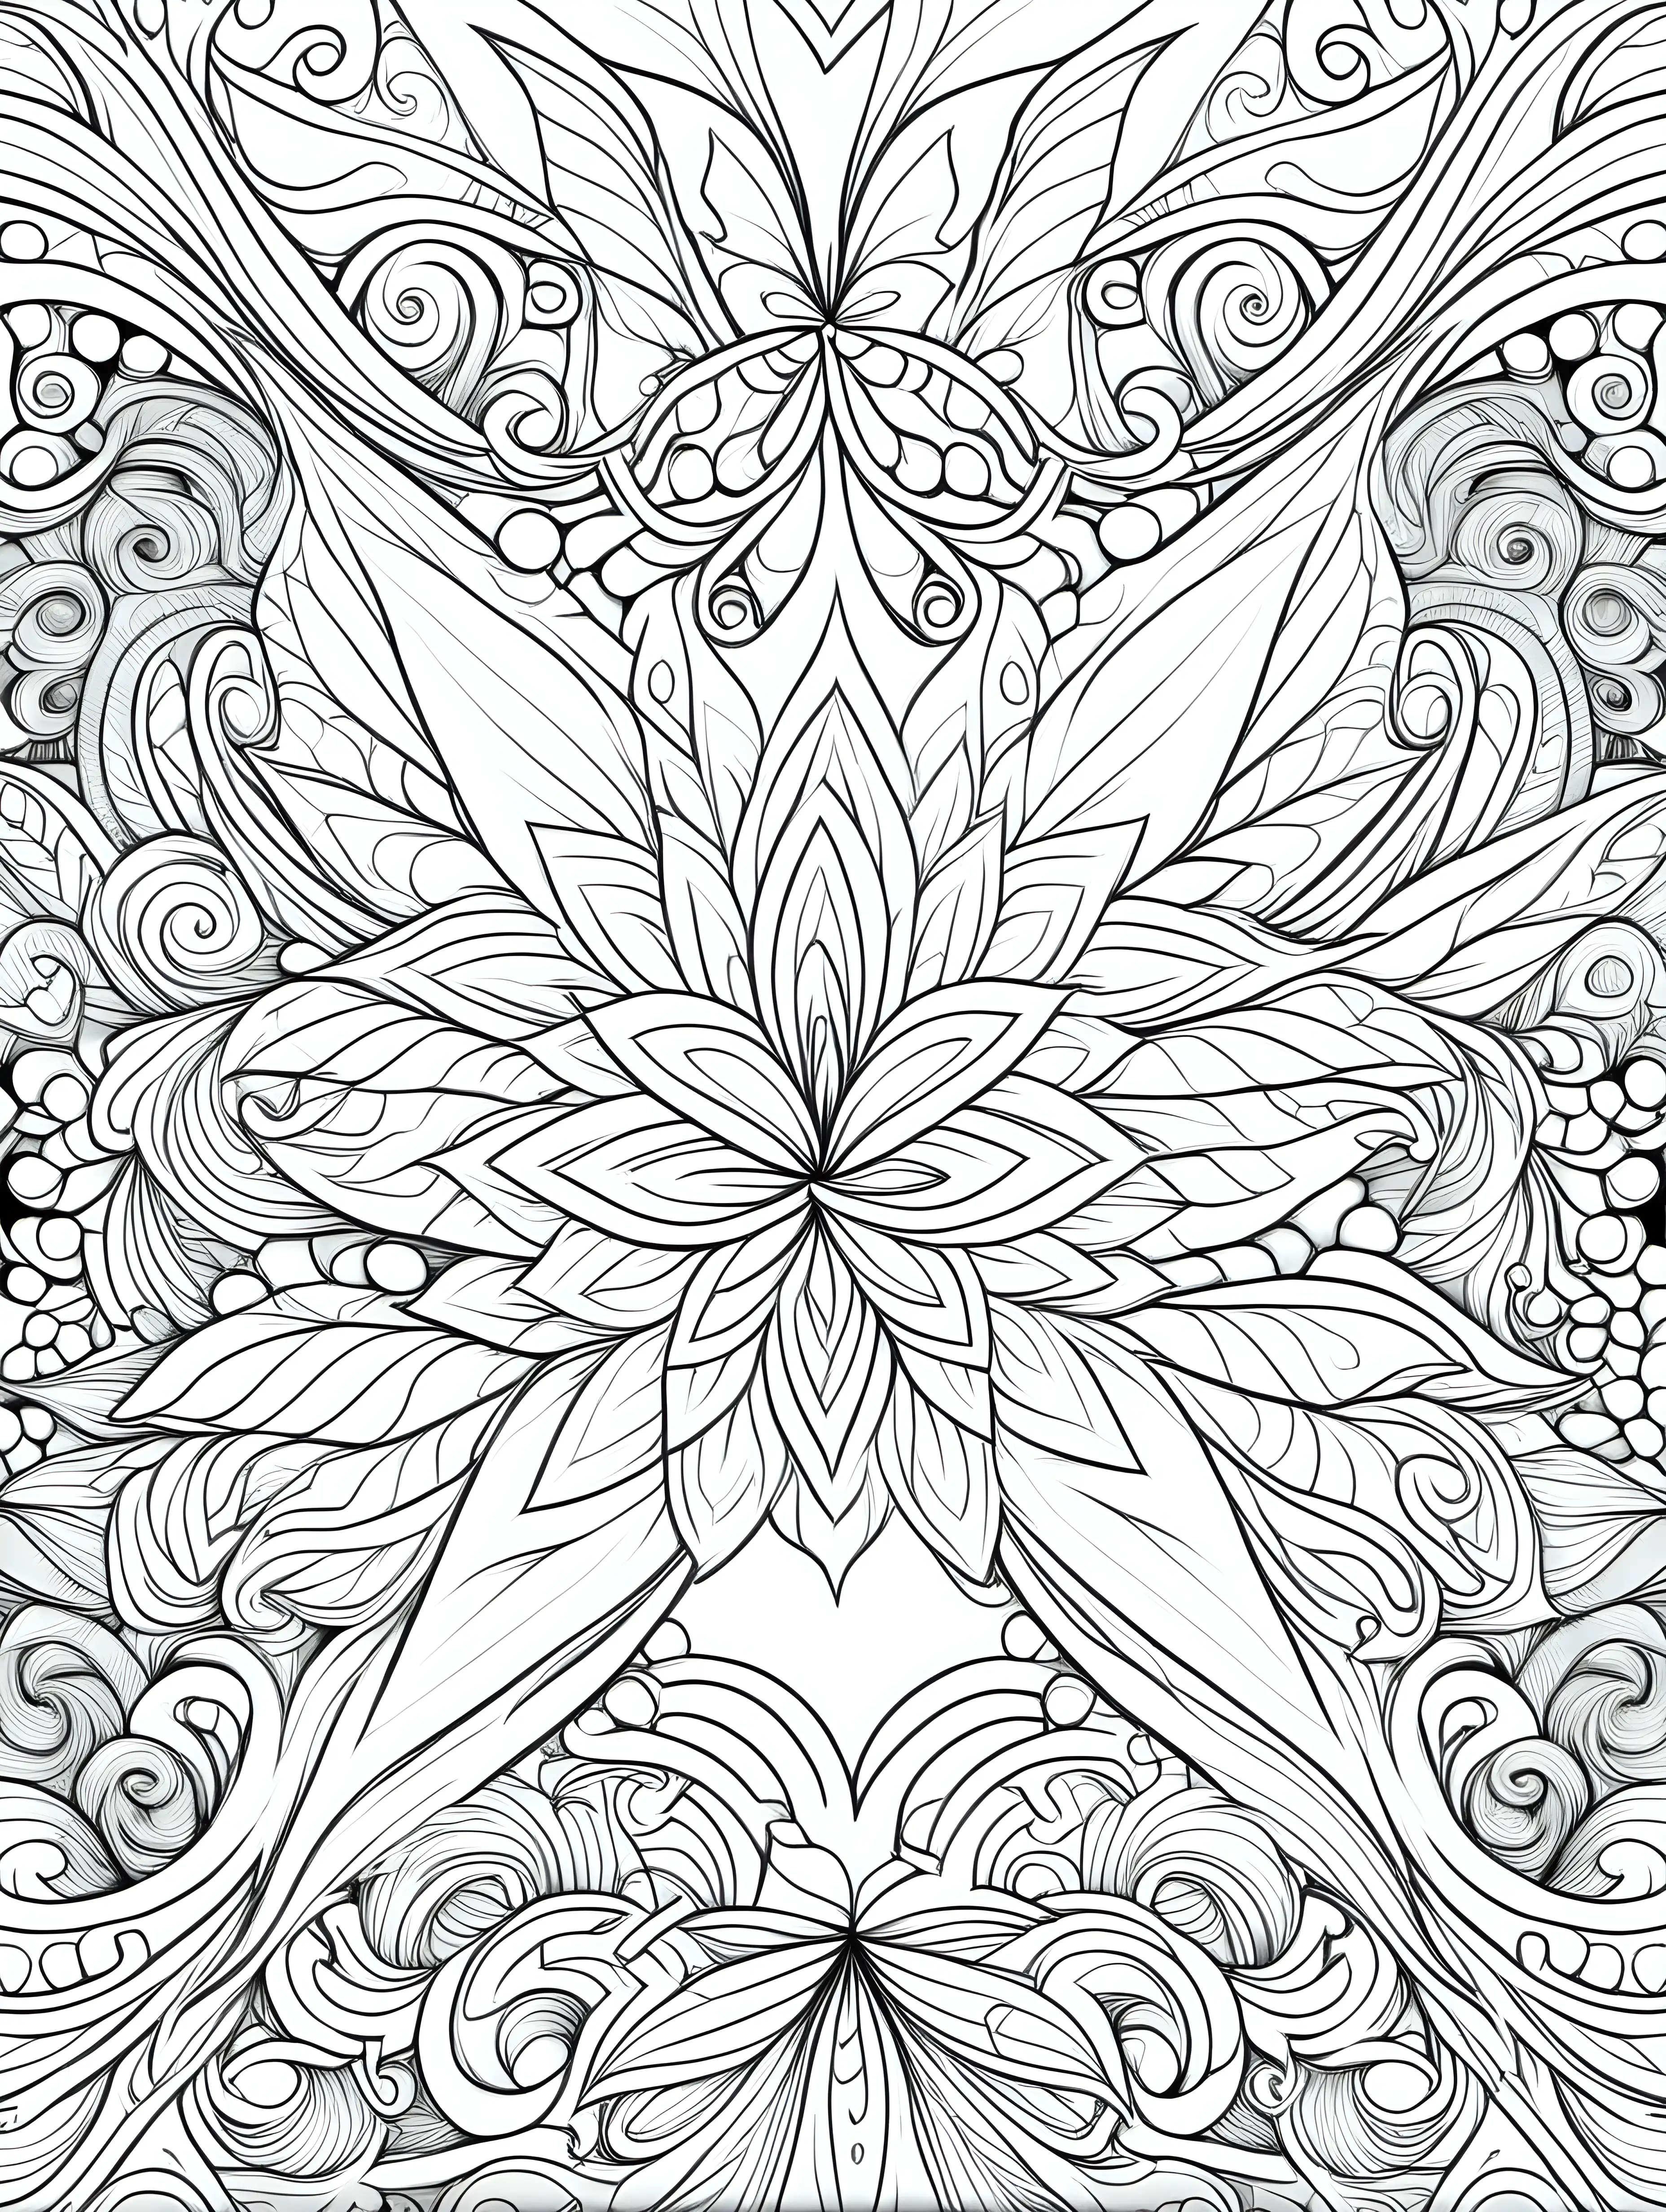 create a seamless magical pattern outline on a white clear background for a adult coloring book
